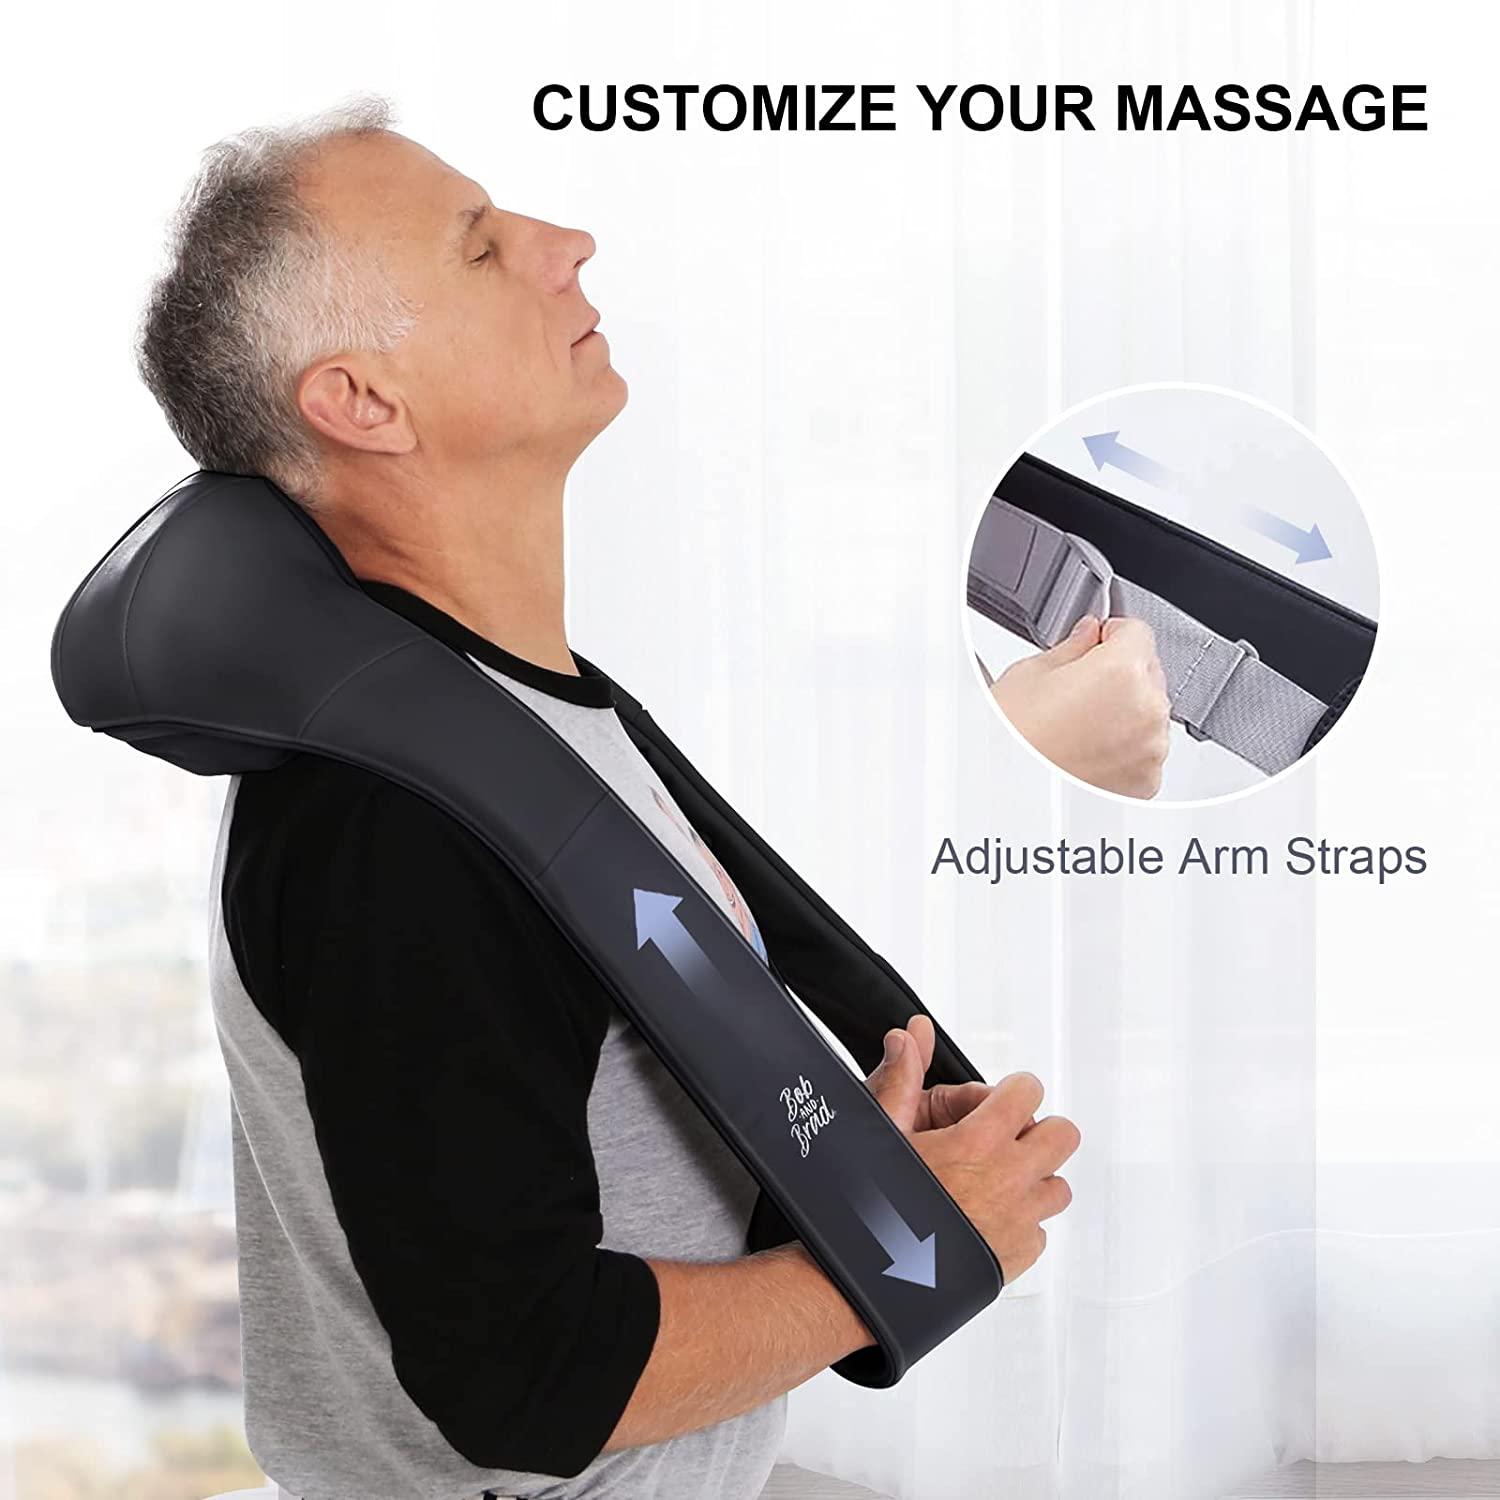 BOB AND BRAD Neck and Shoulder Massager with Heat, Cordless Shiatsu  Massagers for Neck and Back, 3D Kneading Massage Pillow for Muscle Pain  Relief, Relaxation Gifts for Women Men